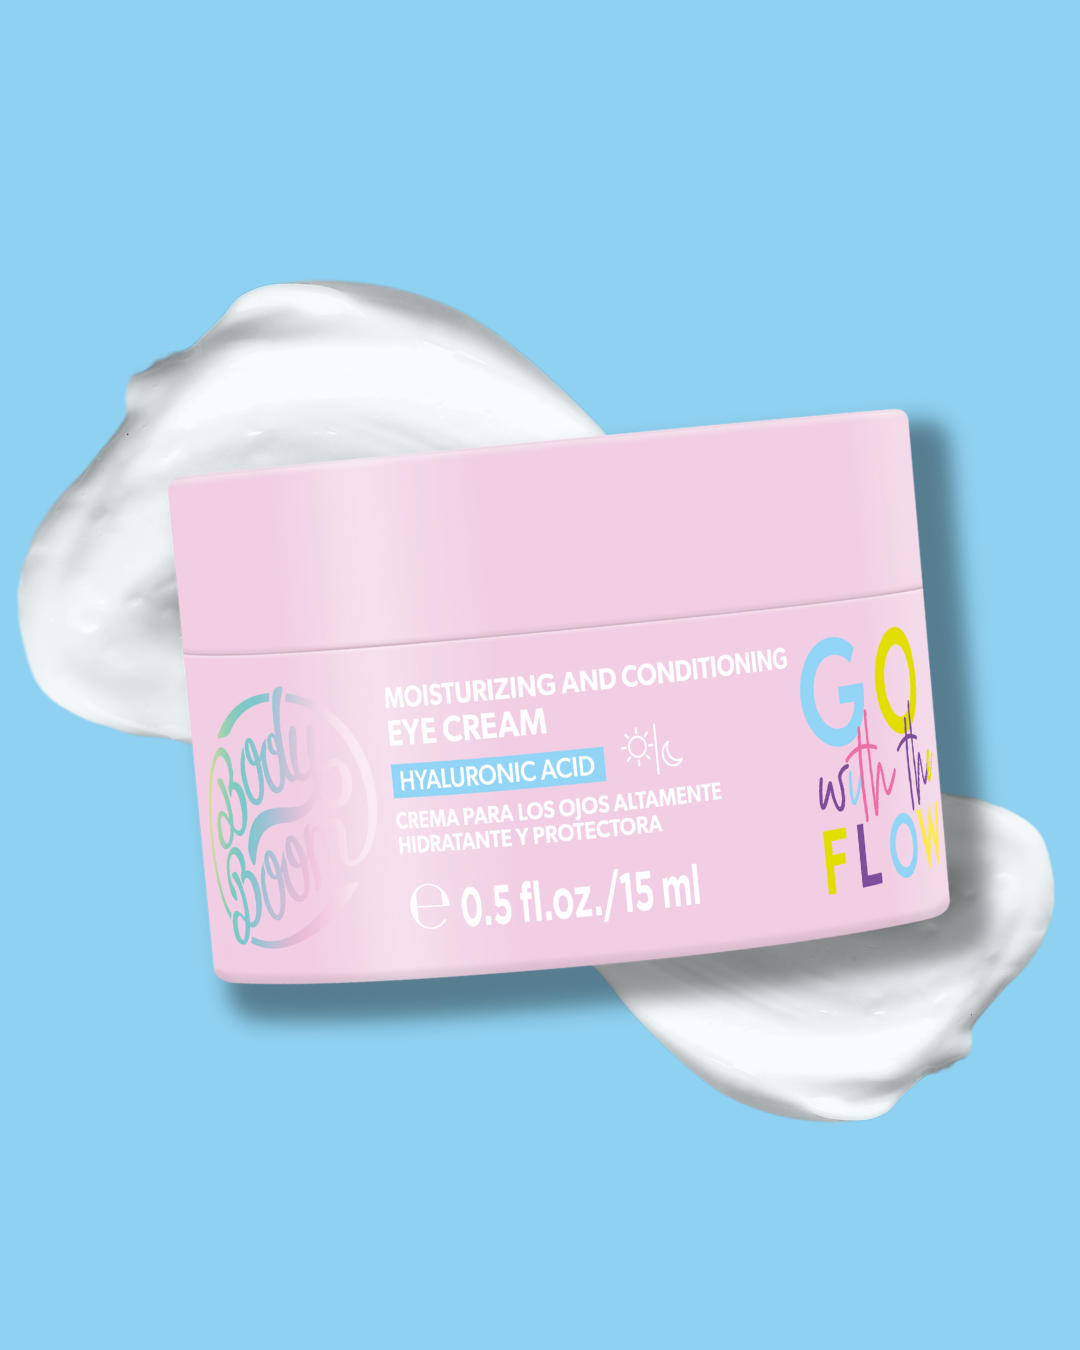 Go With the Flow Moisturizing and Conditioning Eye Cream